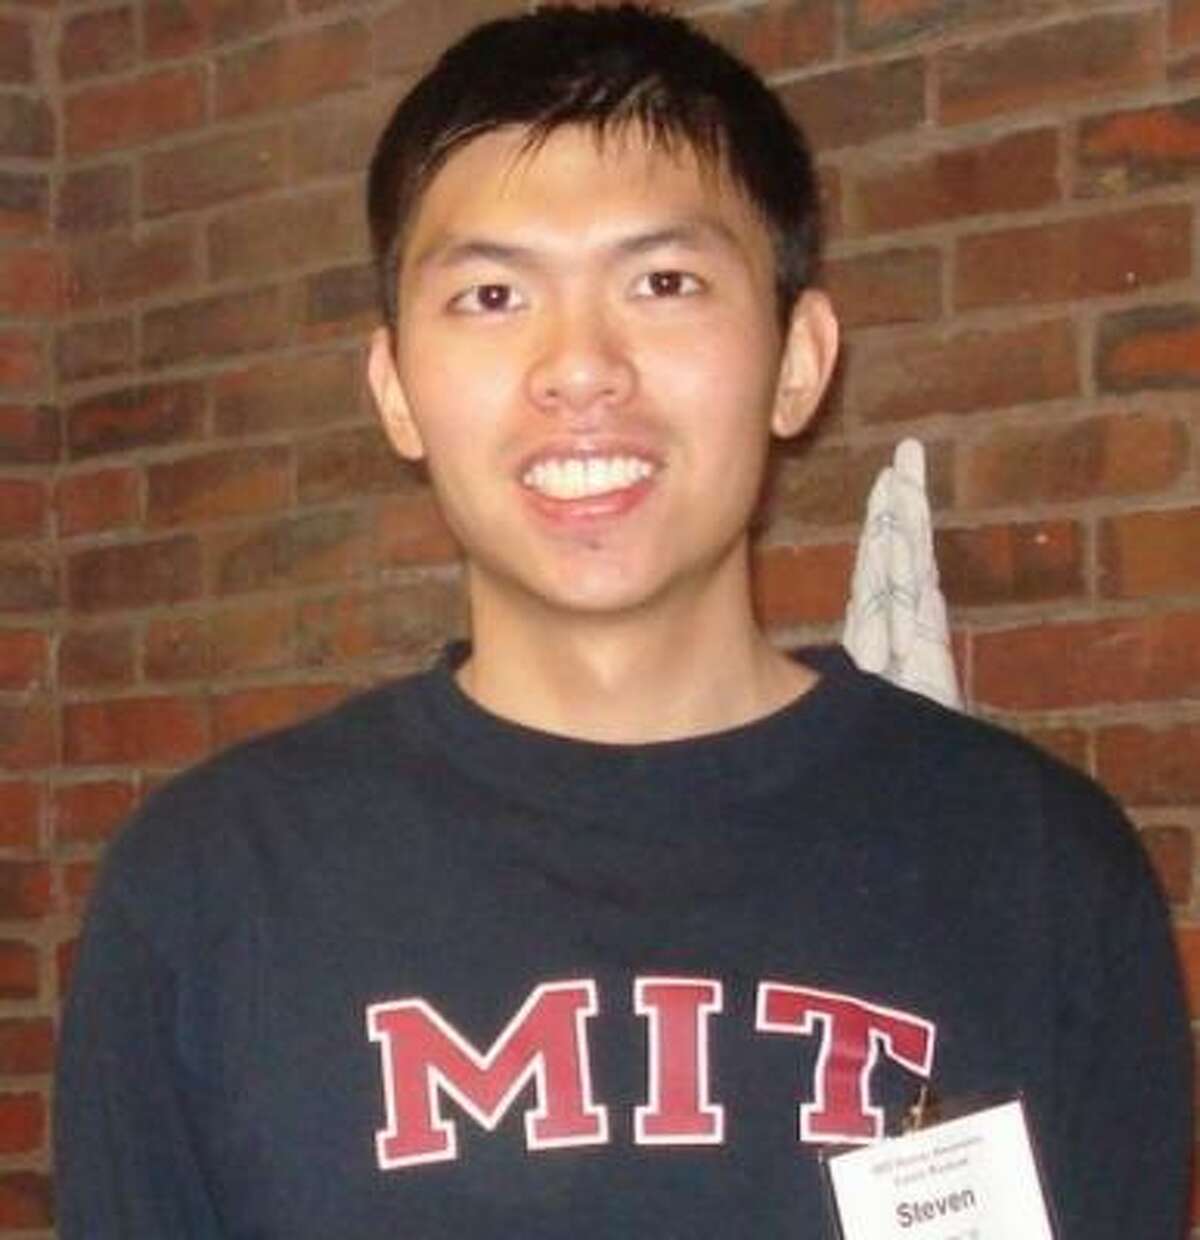 Steven Mo will head to Oxford to work on a doctorate in biomedical engineering.